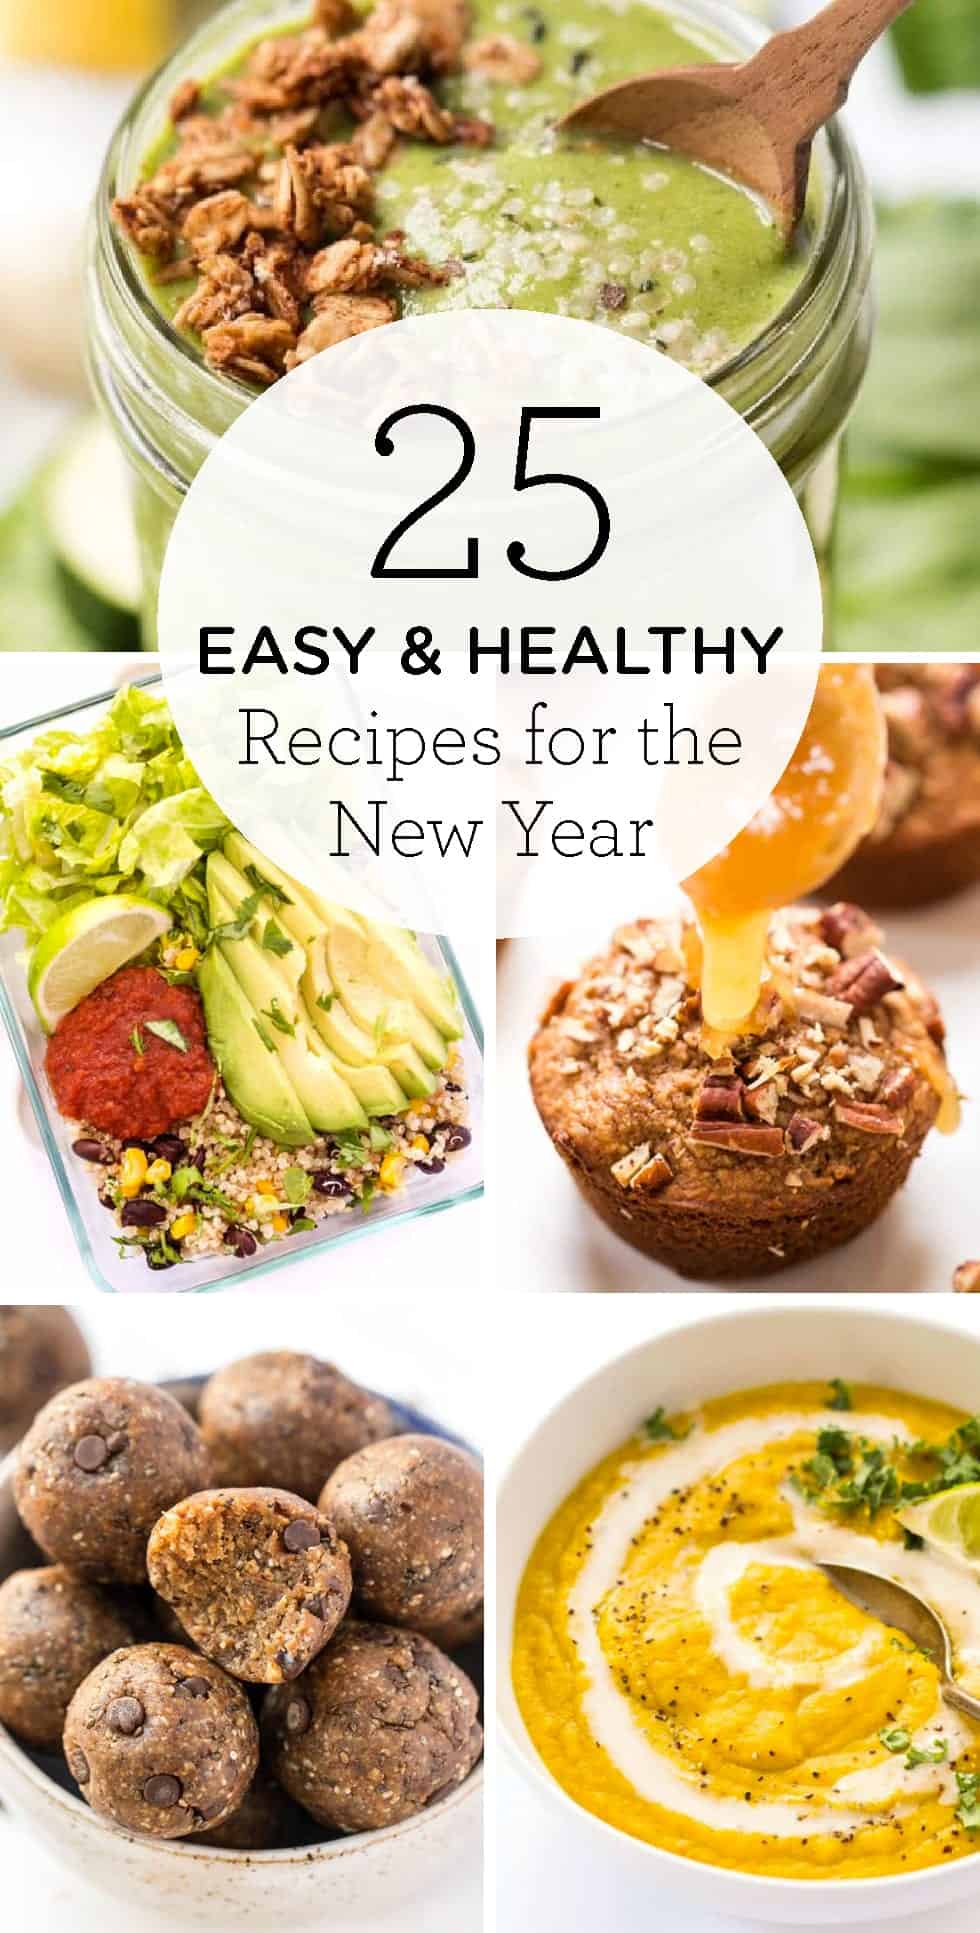 25 Easy & Healthy Recipes for the New Year - Simply Quinoa